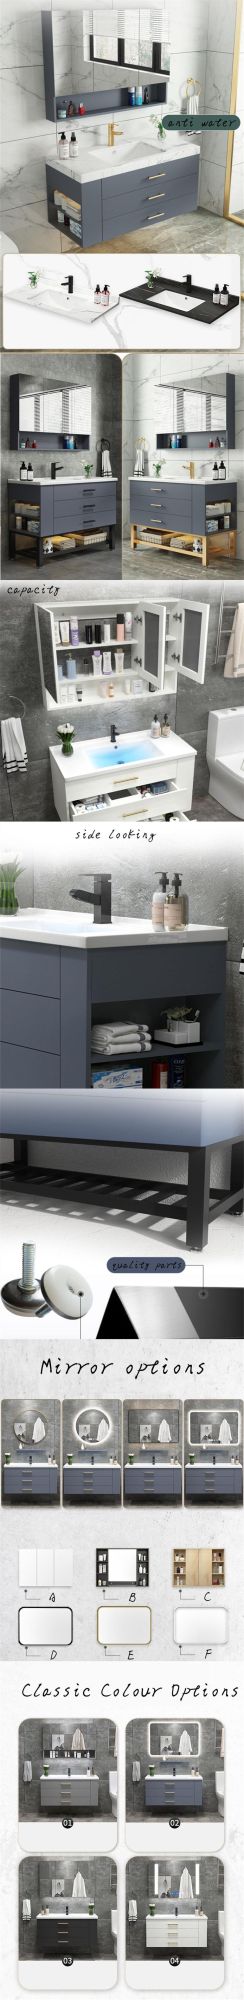 Wall Mounted Bathroom Vanity Cabinet with Modern Simple Metal Leg and Round Mirror